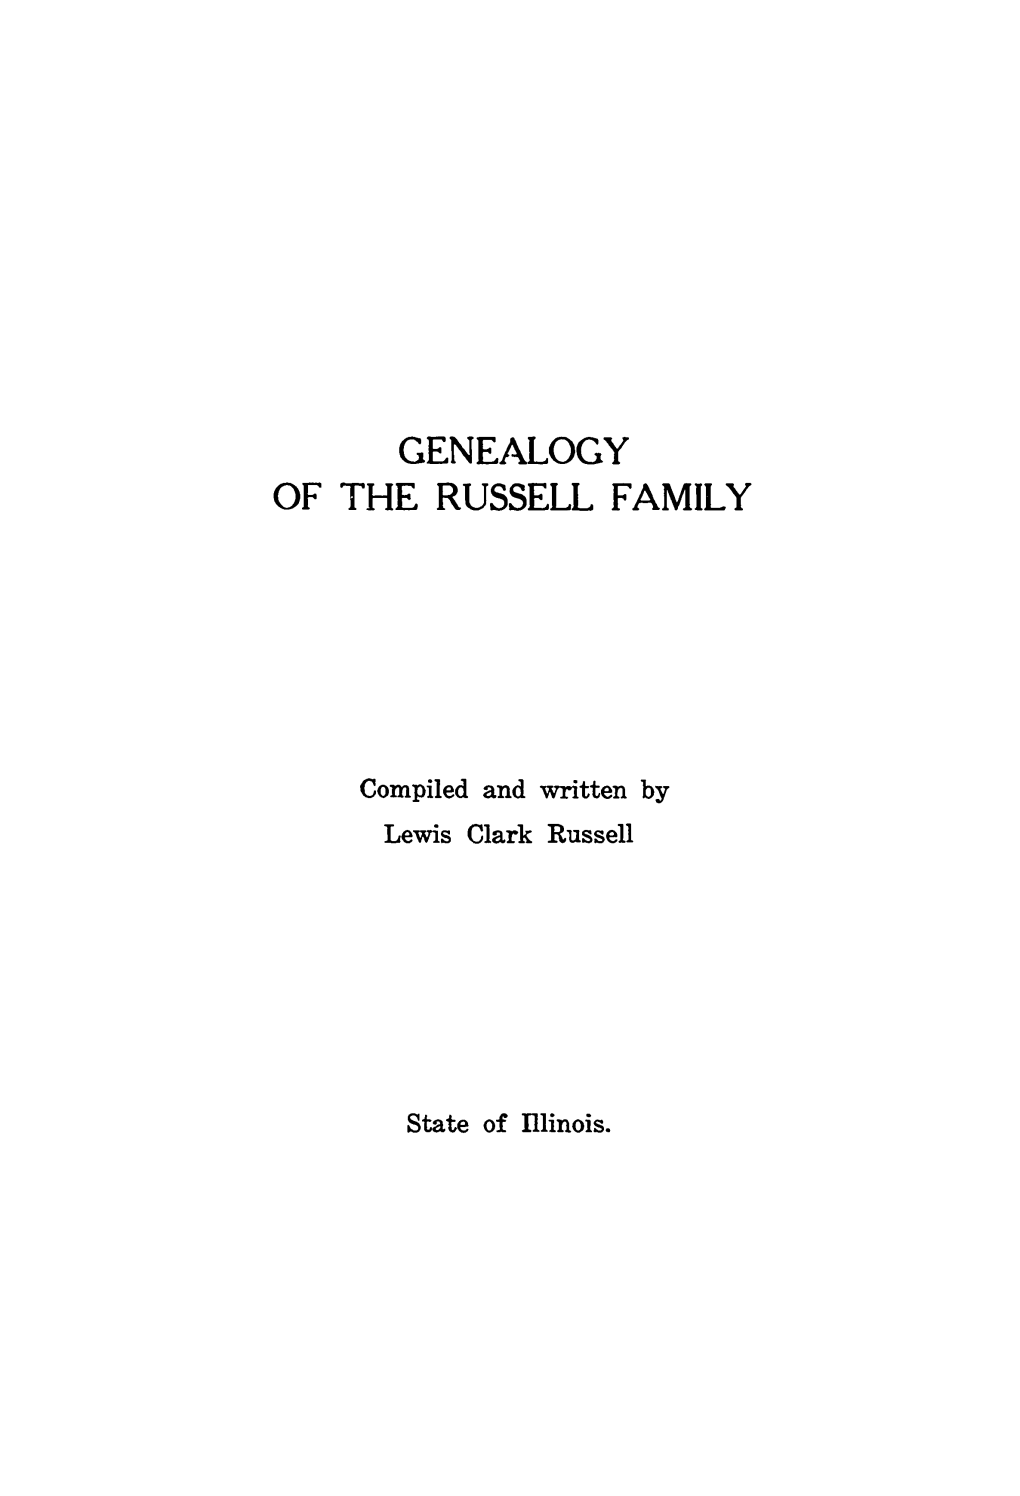 Genealogy of the Russell Family